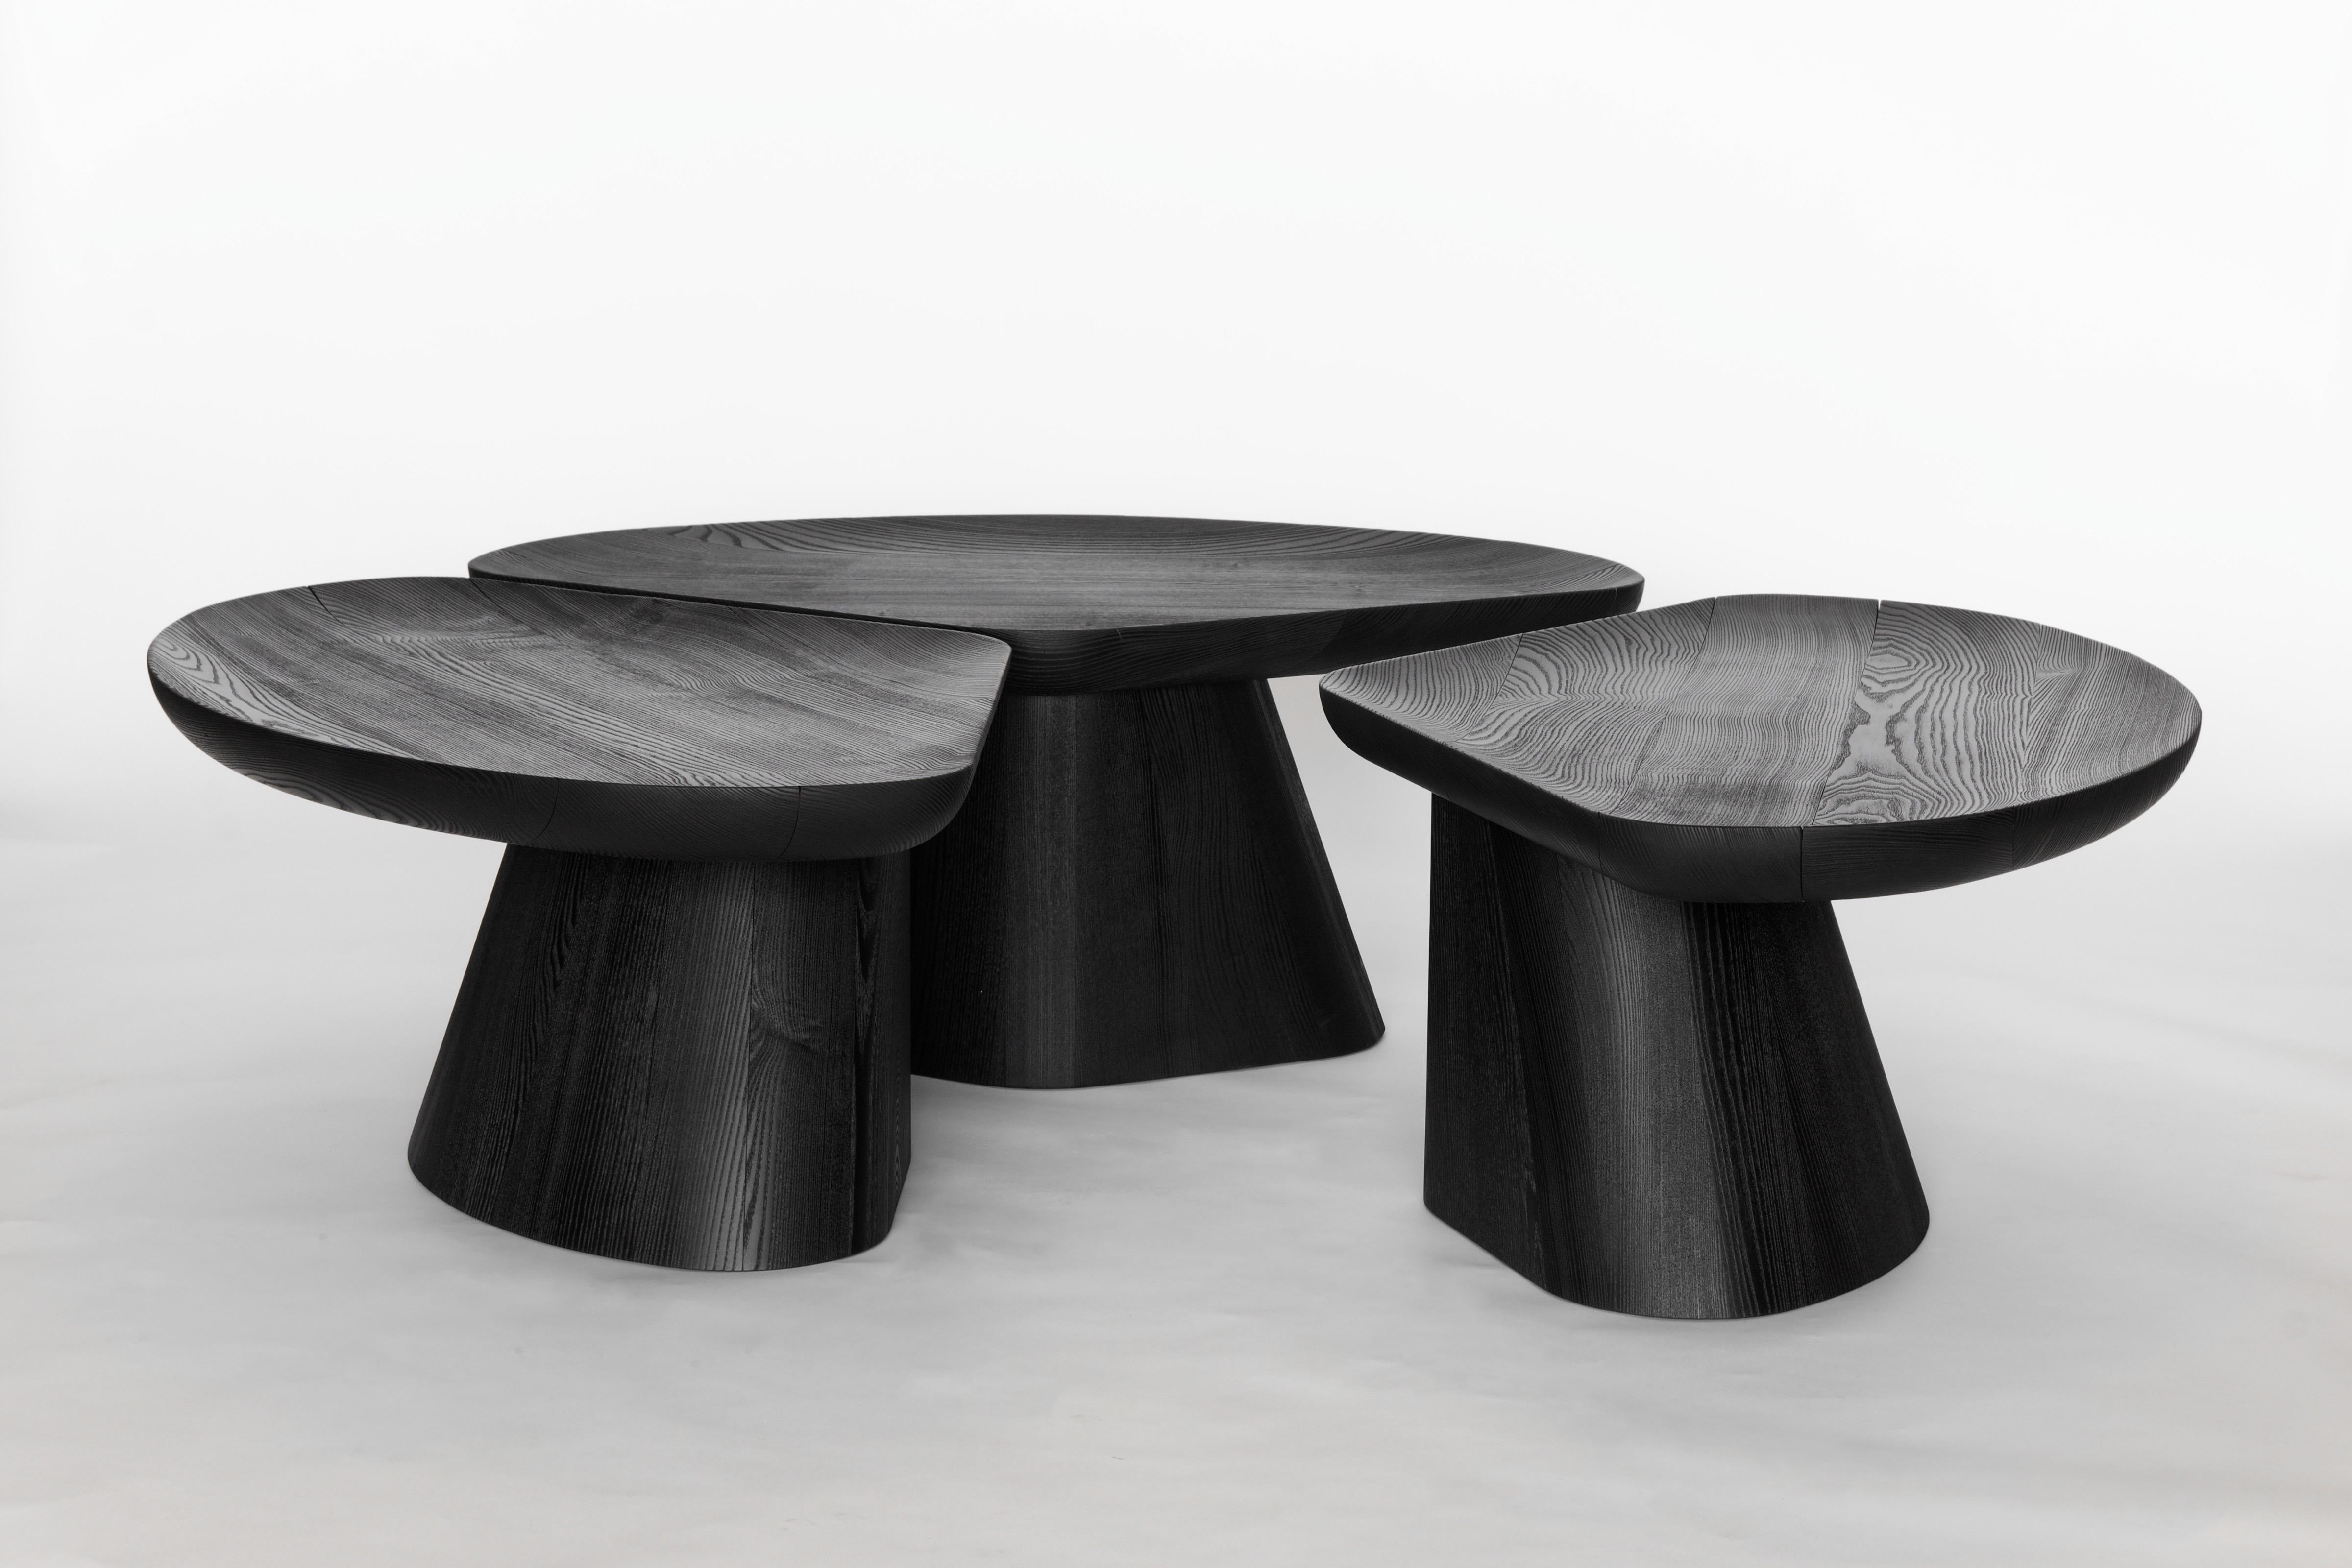 Designer Victoria Magniant and cabinetmaker Thomas Lebecel bring their worlds into dialogue through the KI coffee table. 

The three modules that make up this coffee table form a floating cloverleaf in space creating an impression of